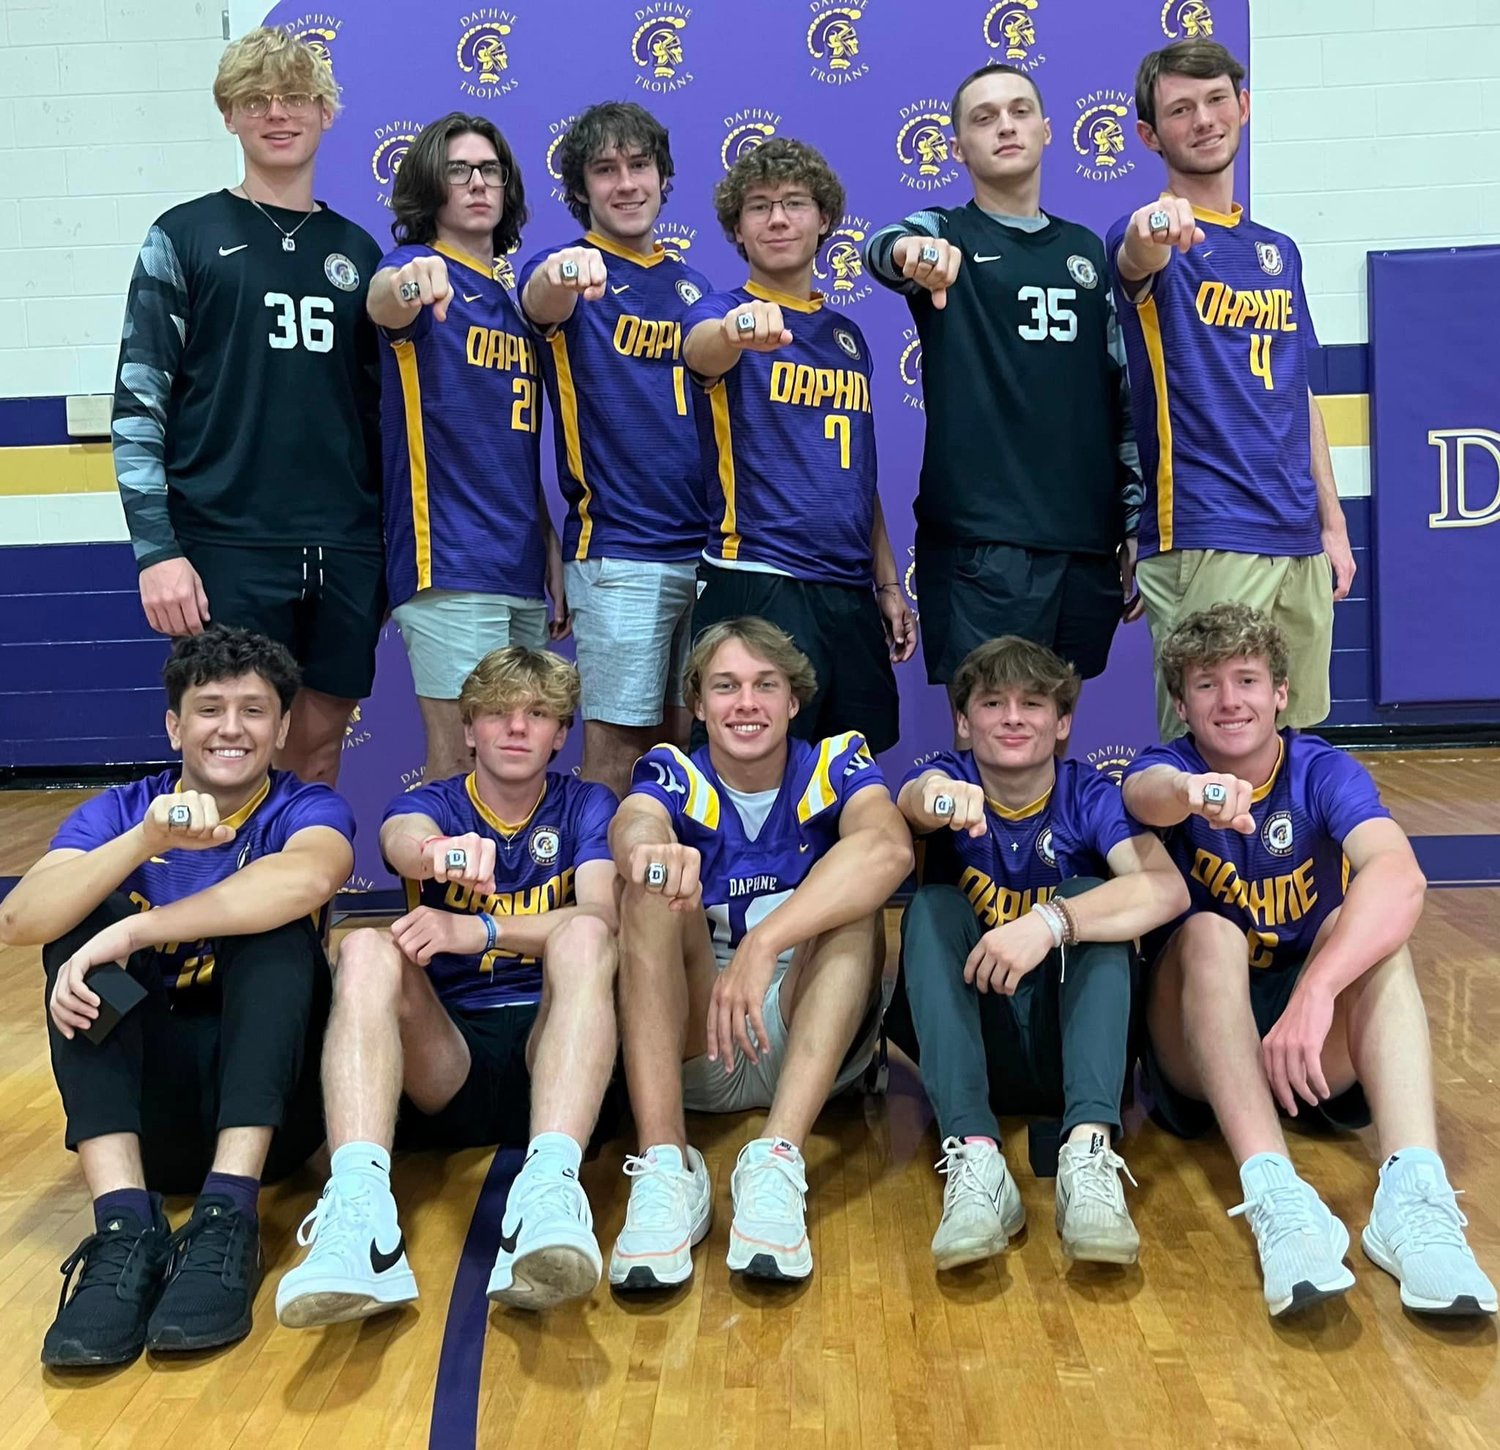 The 2022 Class 7A state champion Daphne Trojans took home the hardware from this past spring’s title game and showed off their championship rings at last week’s homecoming pep rally.